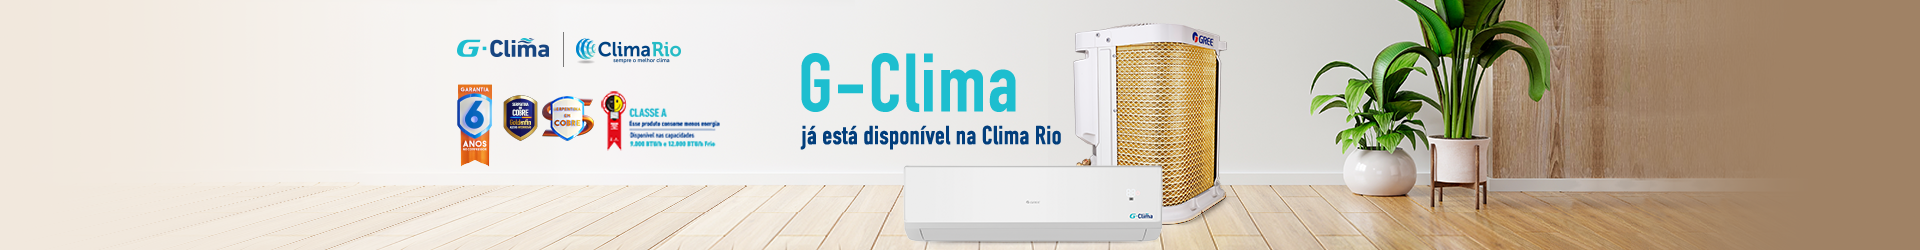 Banner-Gree-G-Clima